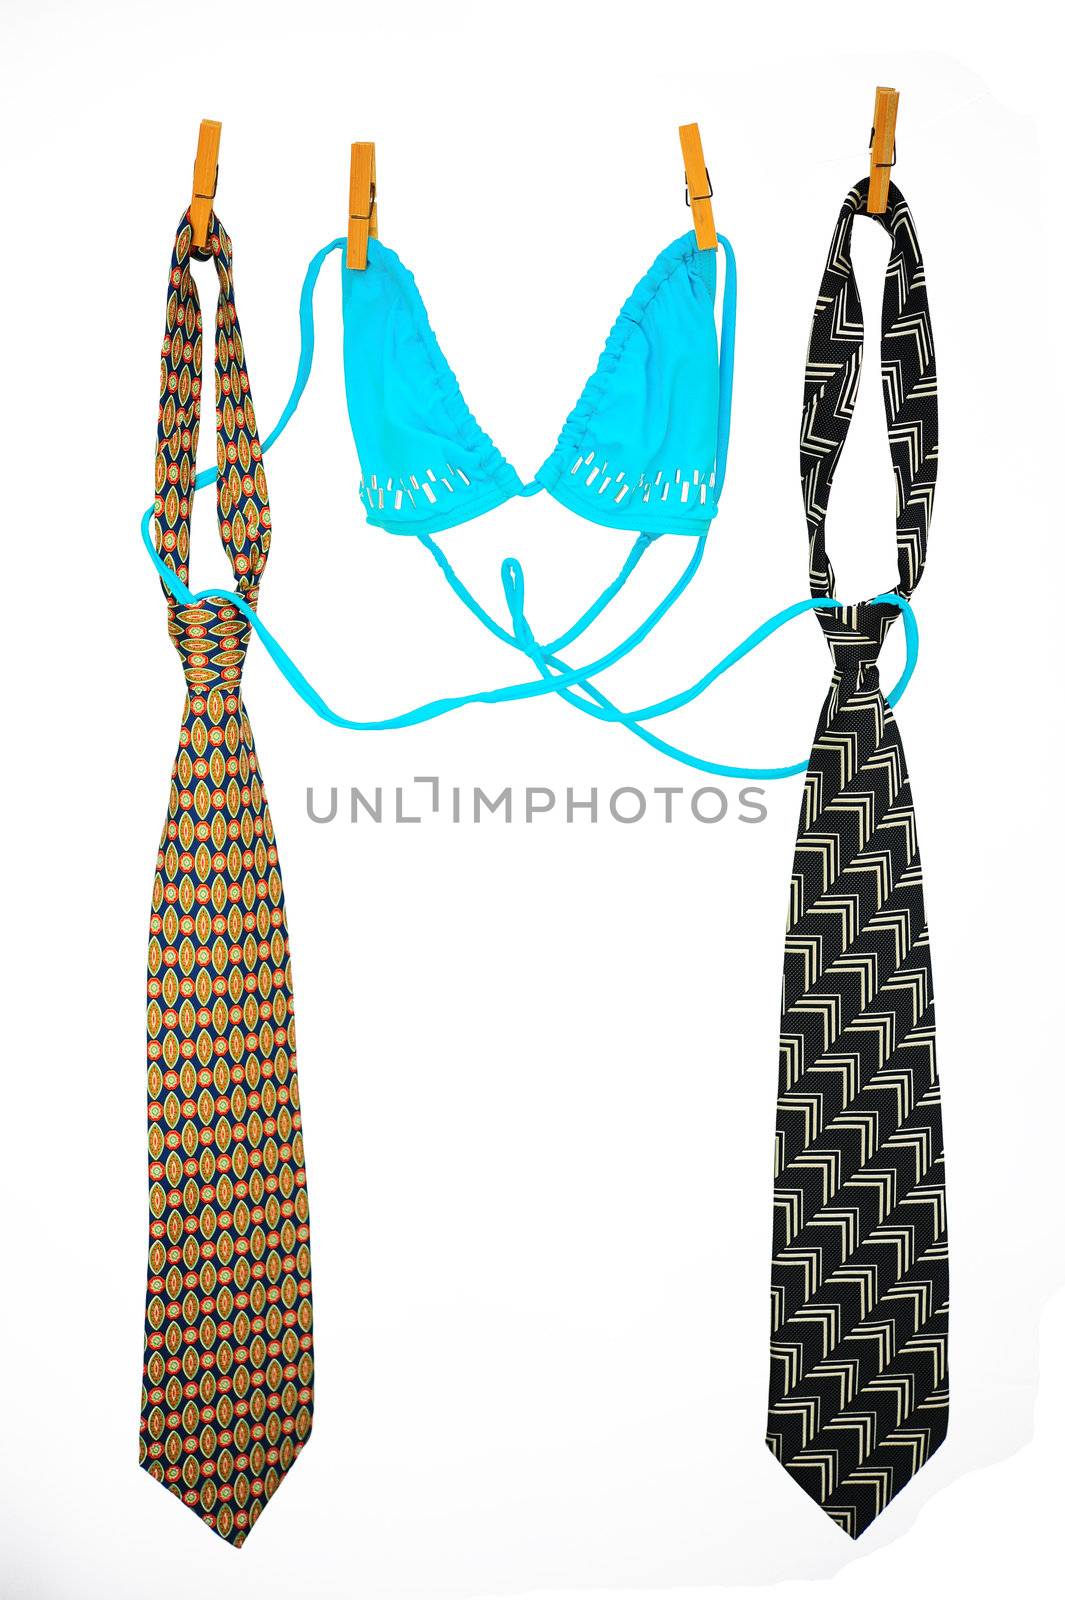 Ties and Bra by gkuna